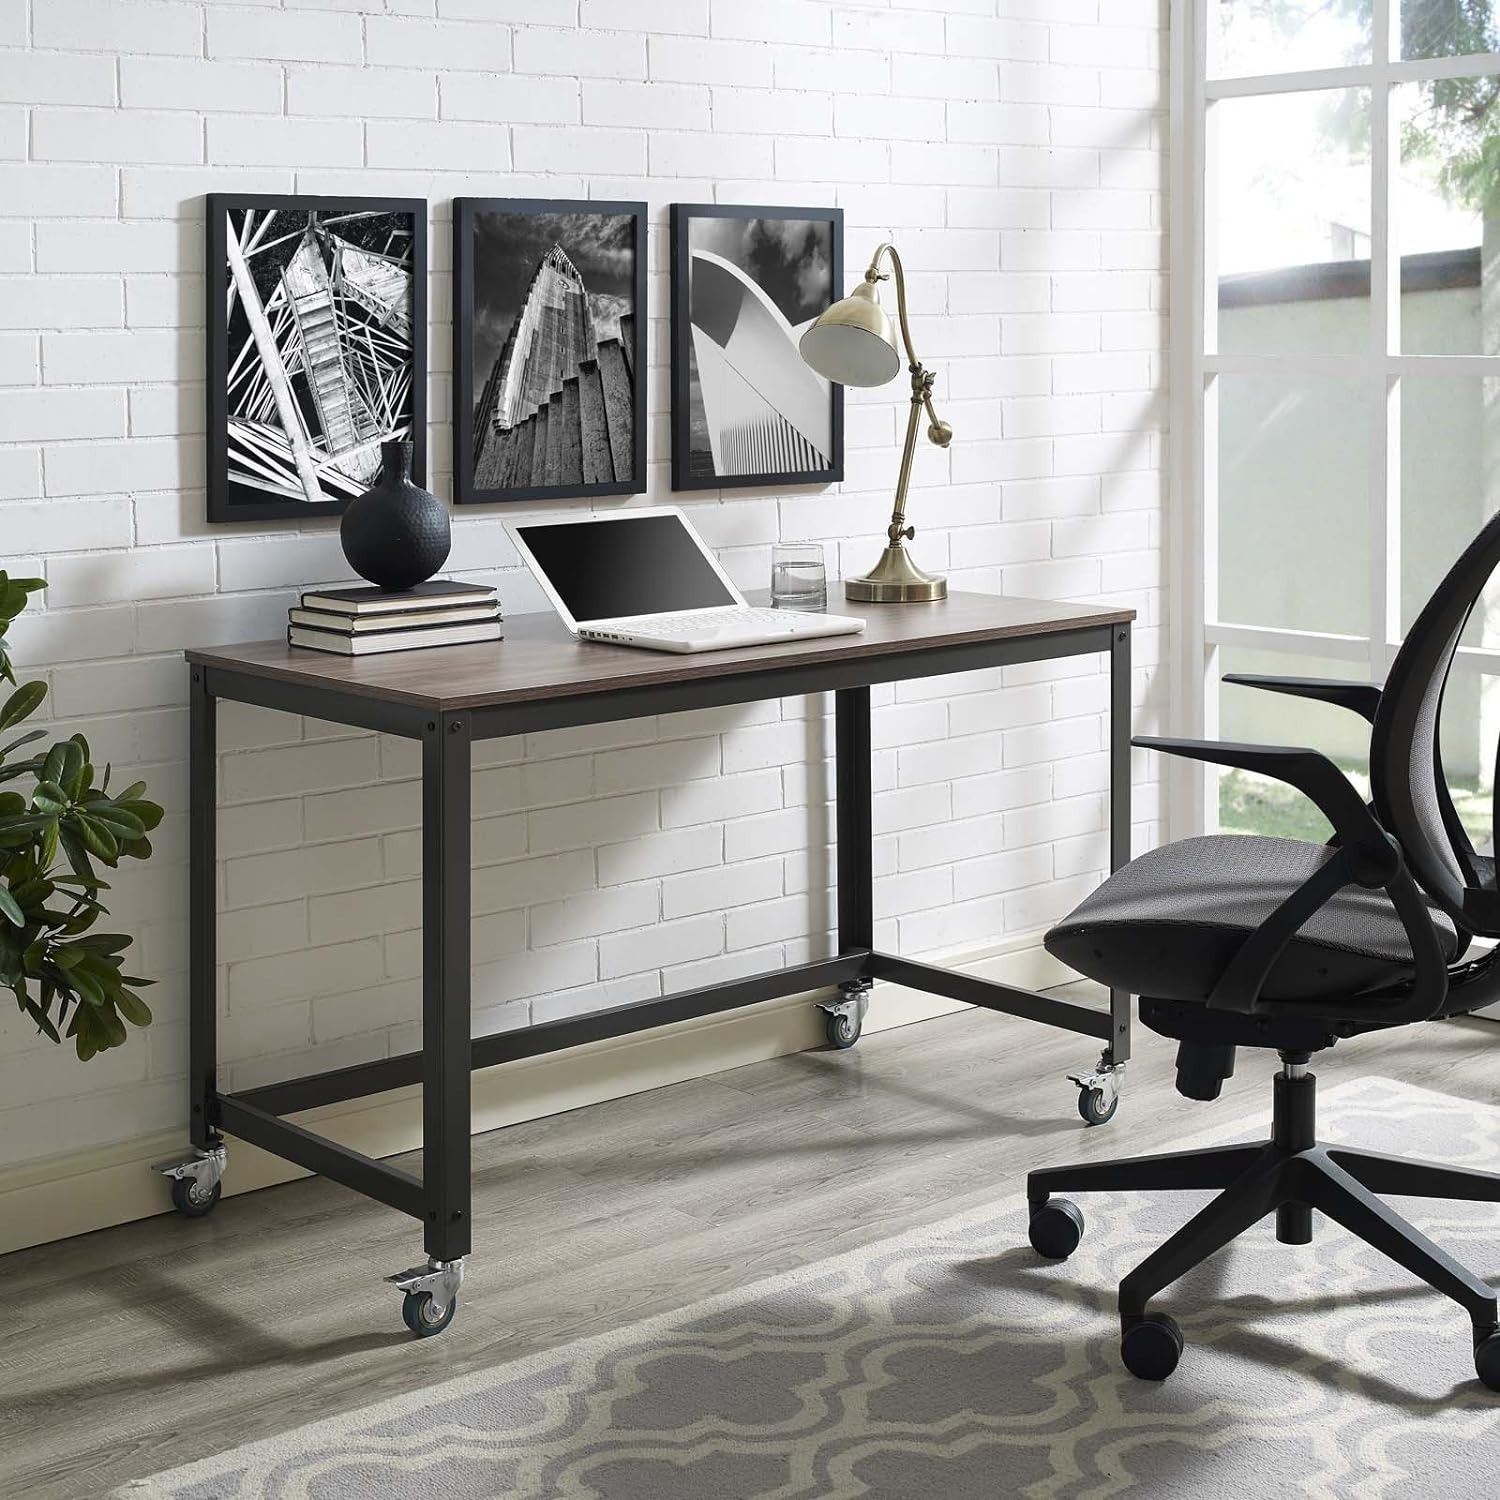 Modway 47" Vivify Industrial Modern Computer Office Desk with Locking Casters $61.99 + Free Shipping